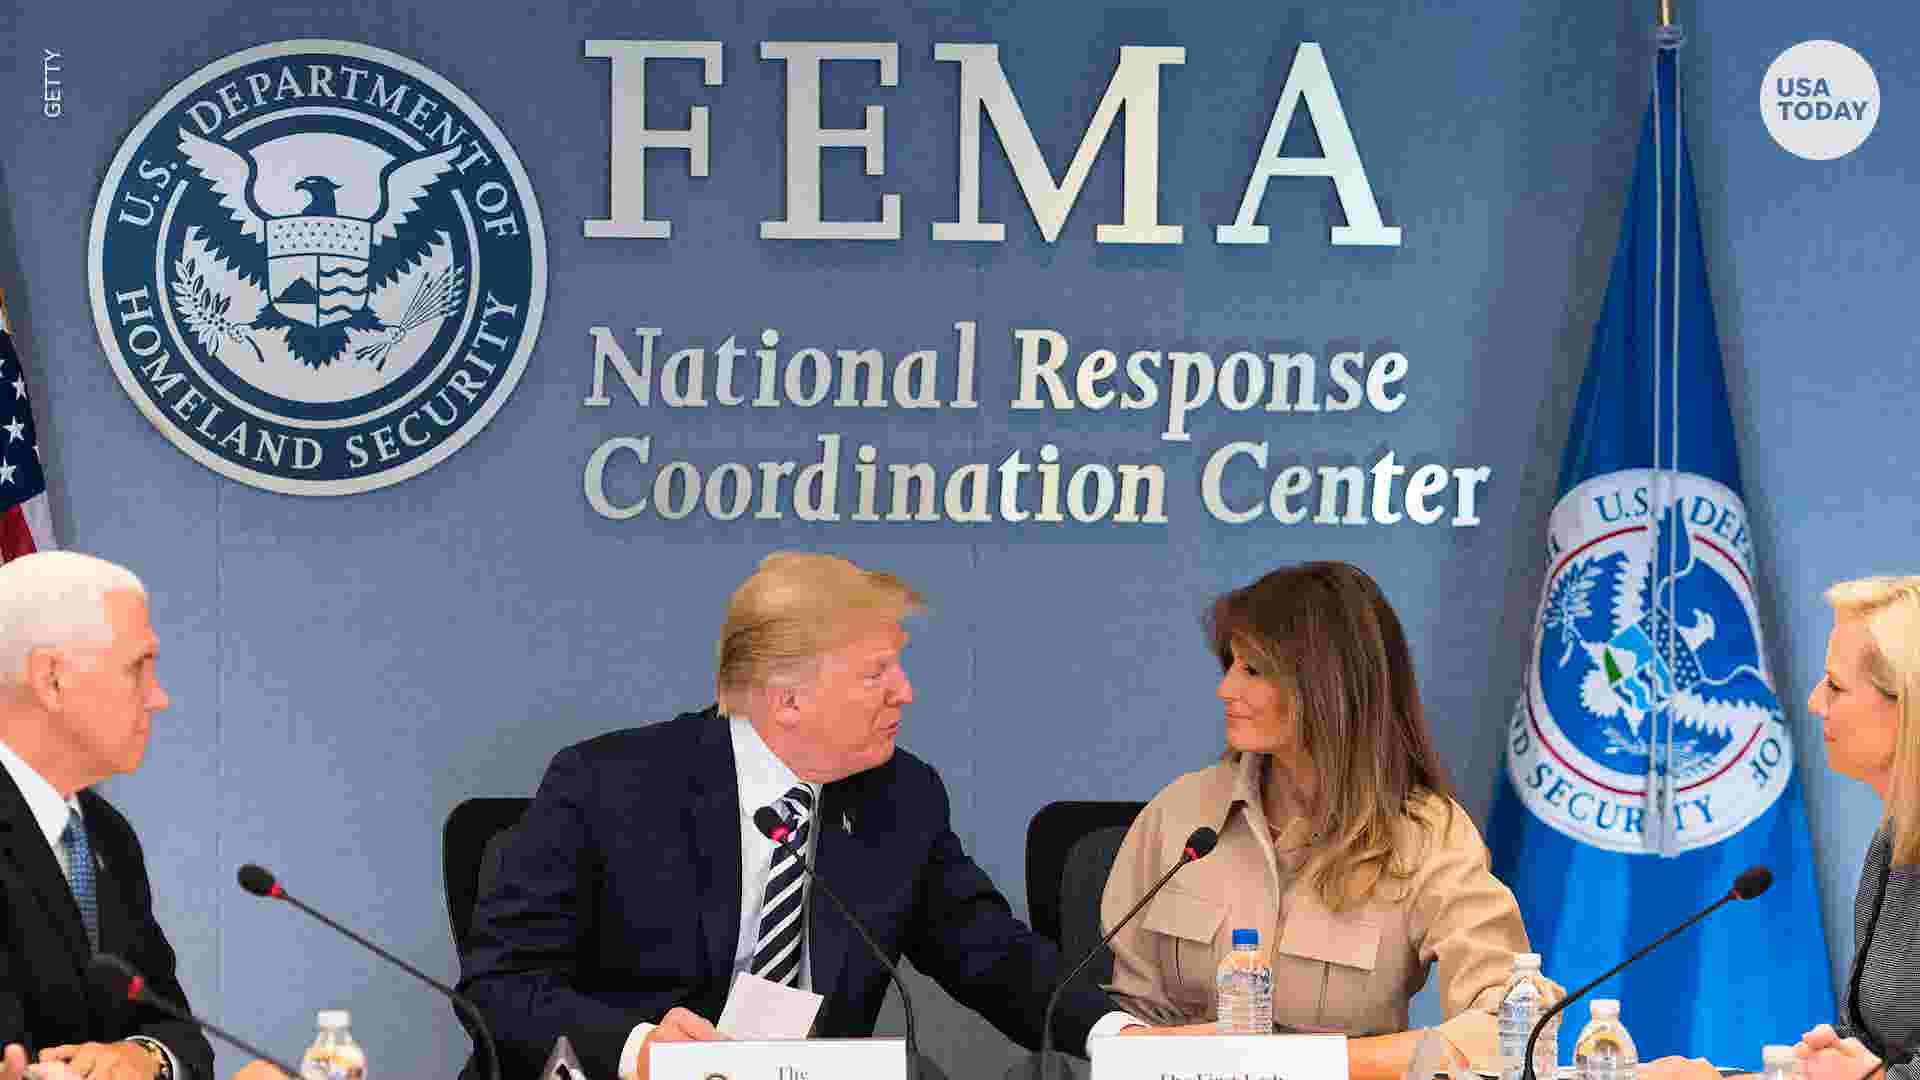 Fema S Budget Cut By Million To Support Ice Documents Show